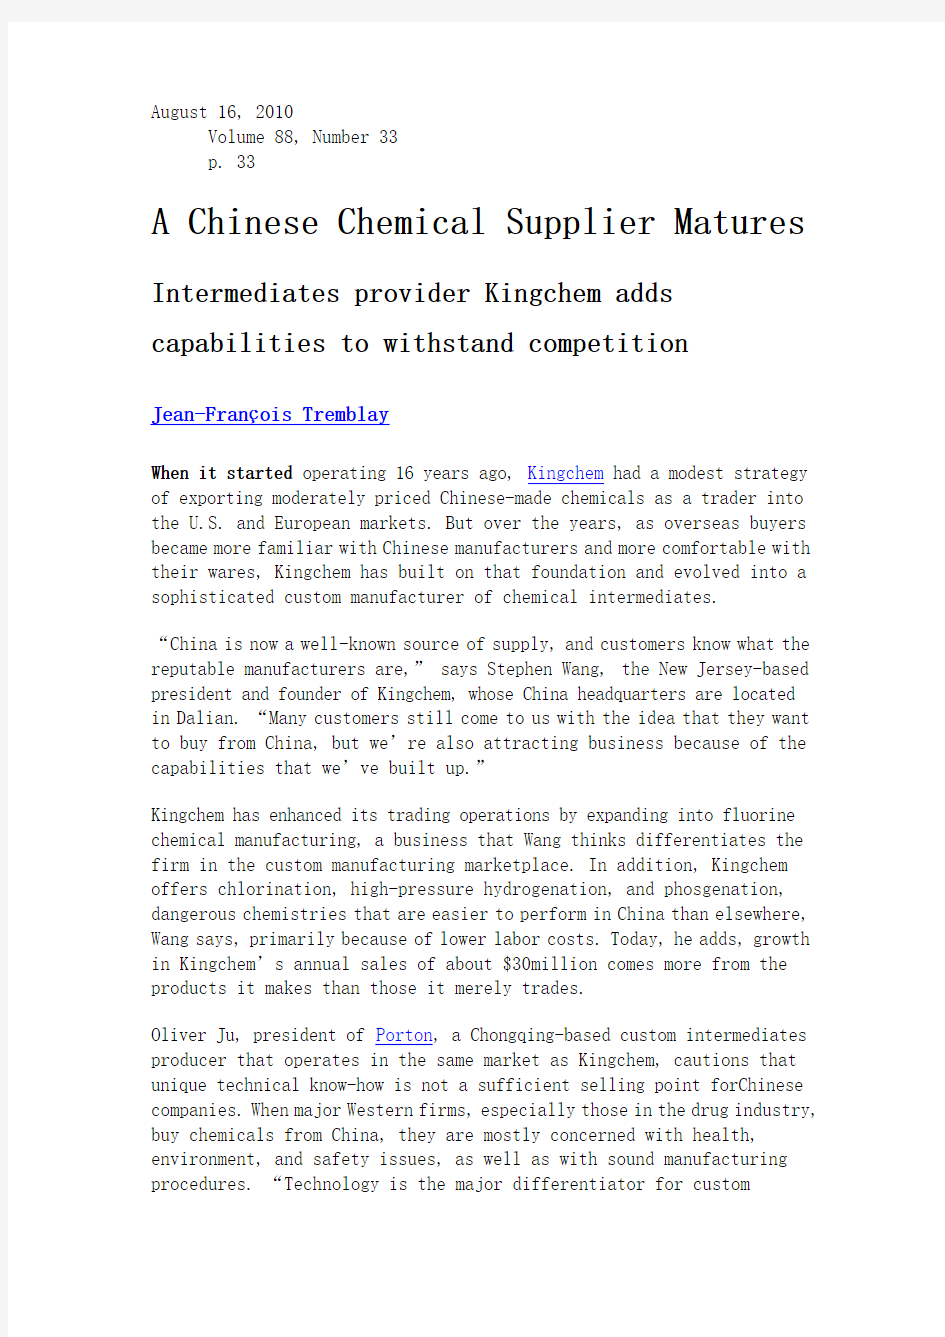 A Chinese Chemical Supplier Matures2010-33